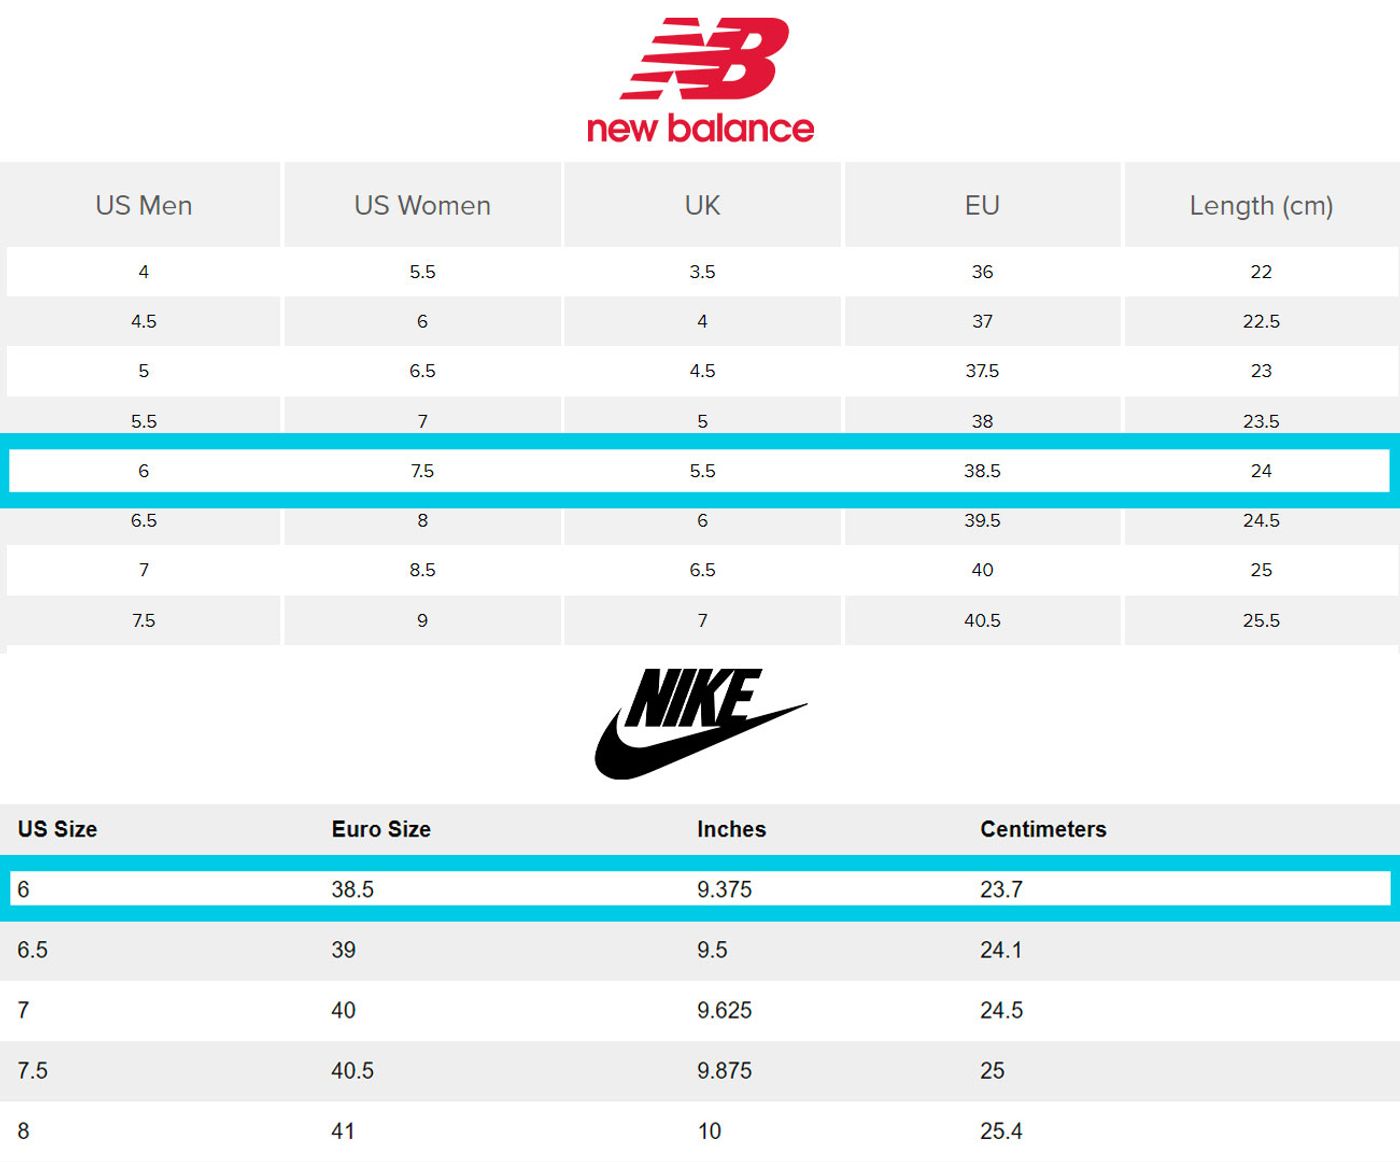 nike-vs-new-balance-sizing-how-do-they-compare